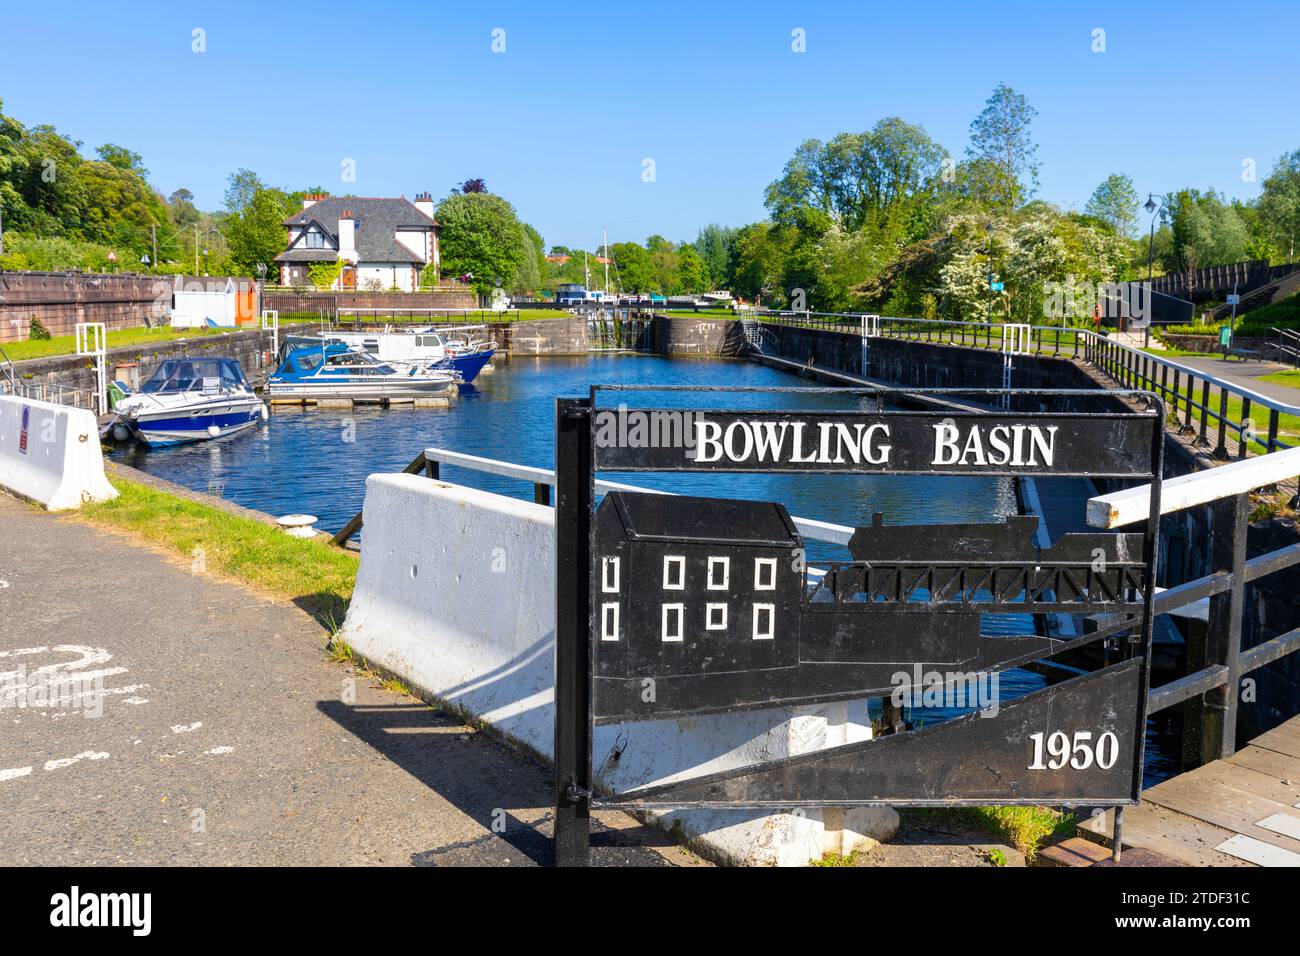 Bowling harbour, Upper Basin, Forth and Clyde Canal, Bowling, West Dunbartonshire, Scotland, United Kingdom, Europe Stock Photo